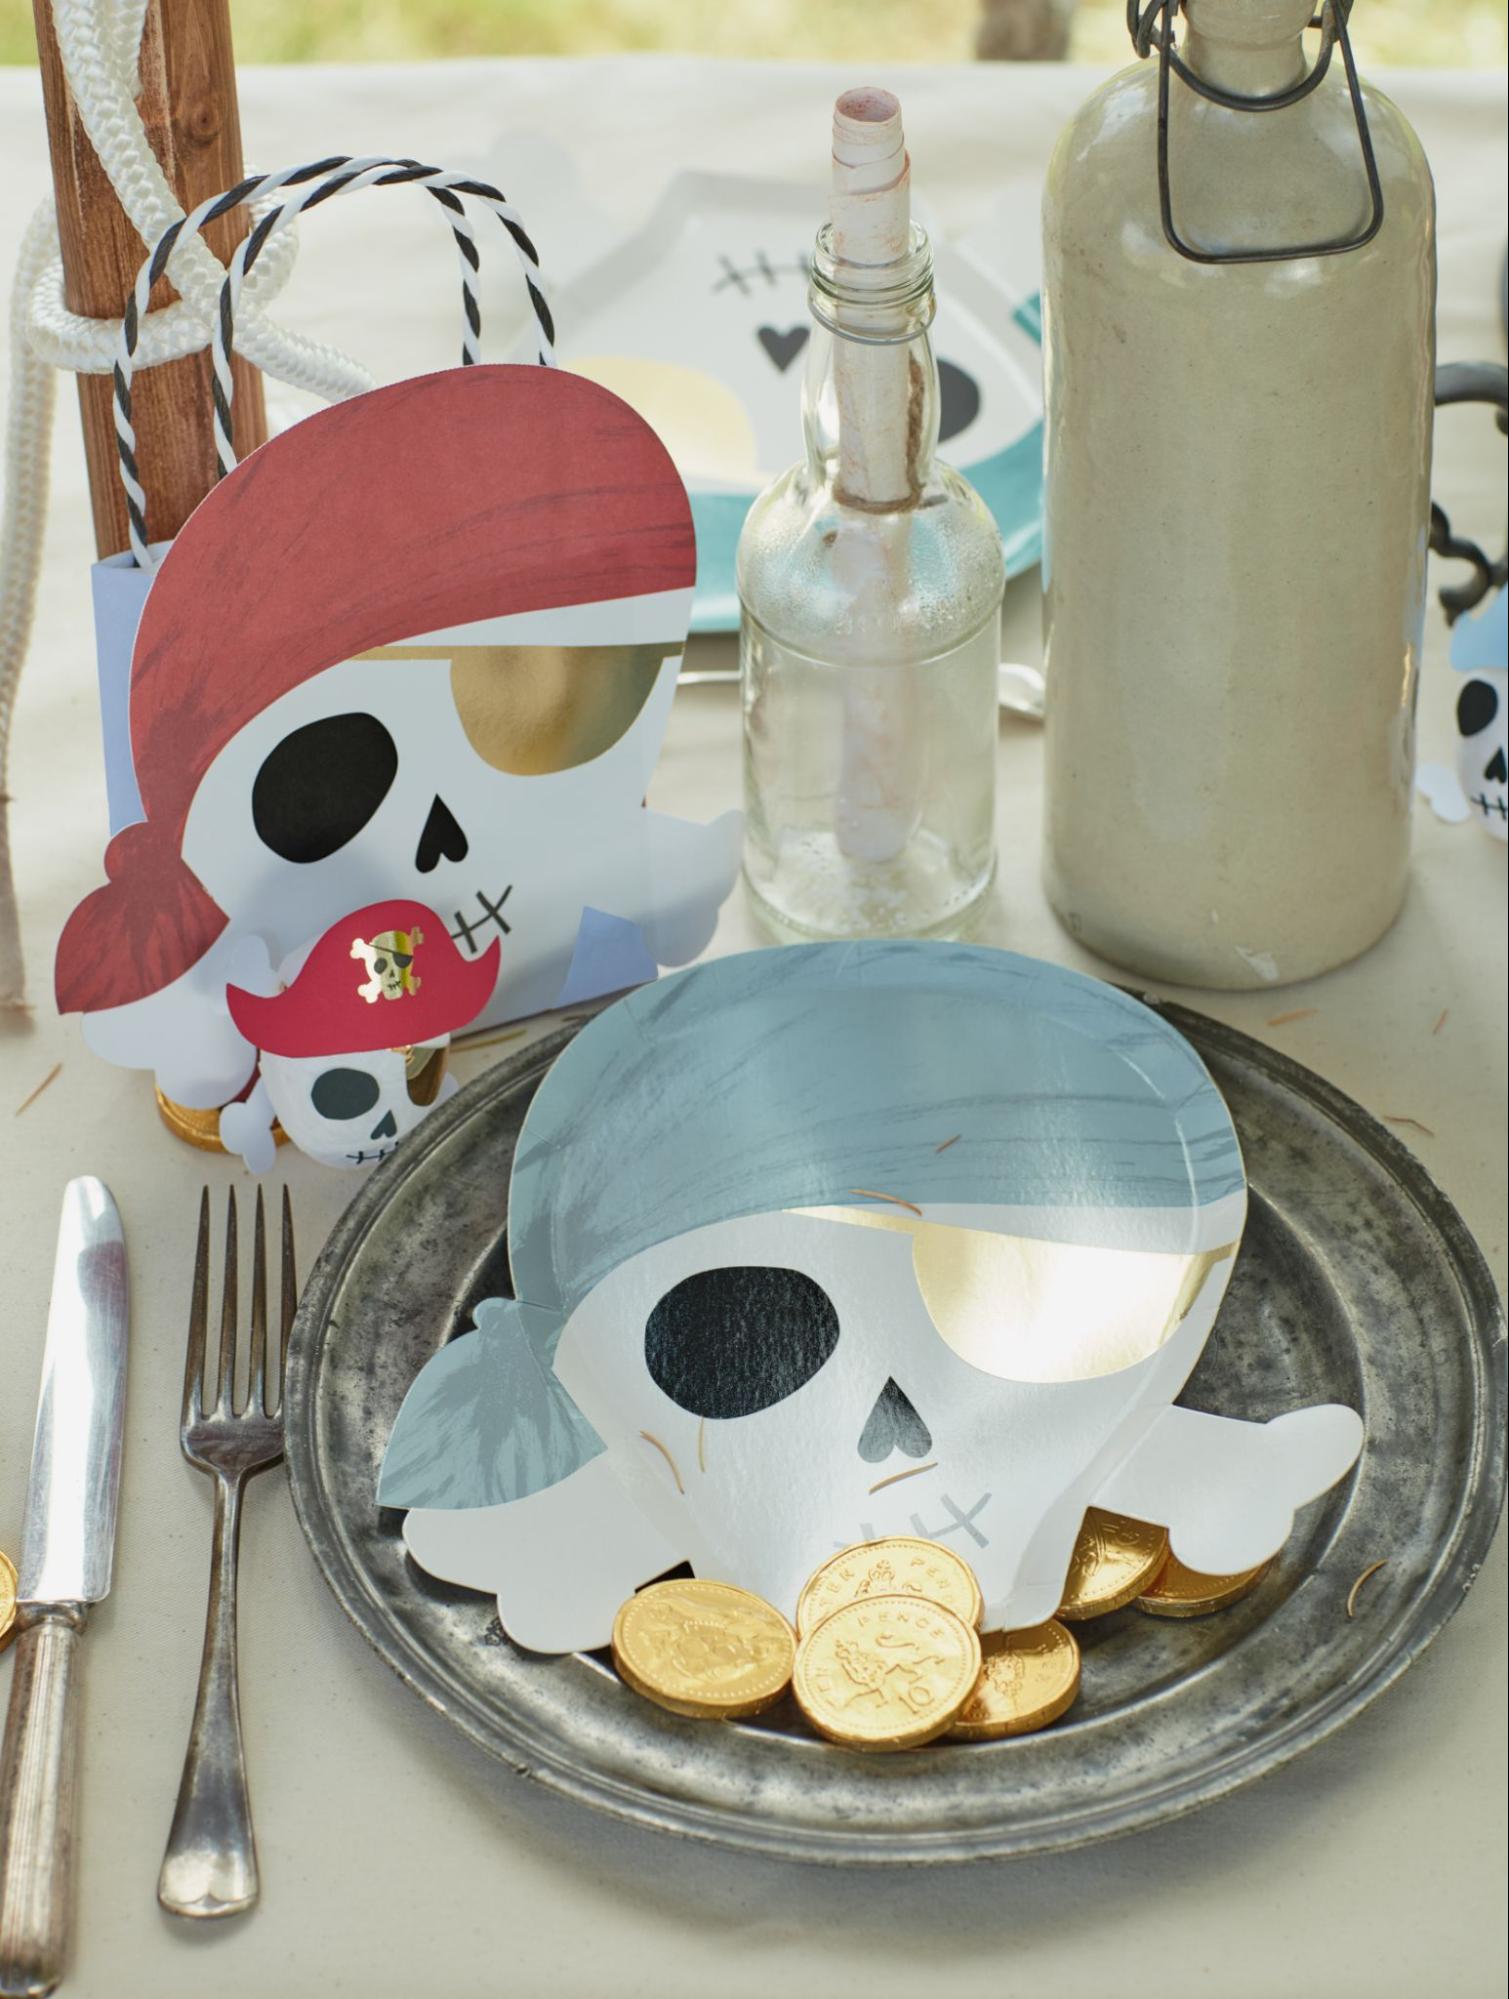 Skull and crossbones plates and other pirate-themed tableware set up at a pirate birthday party. 